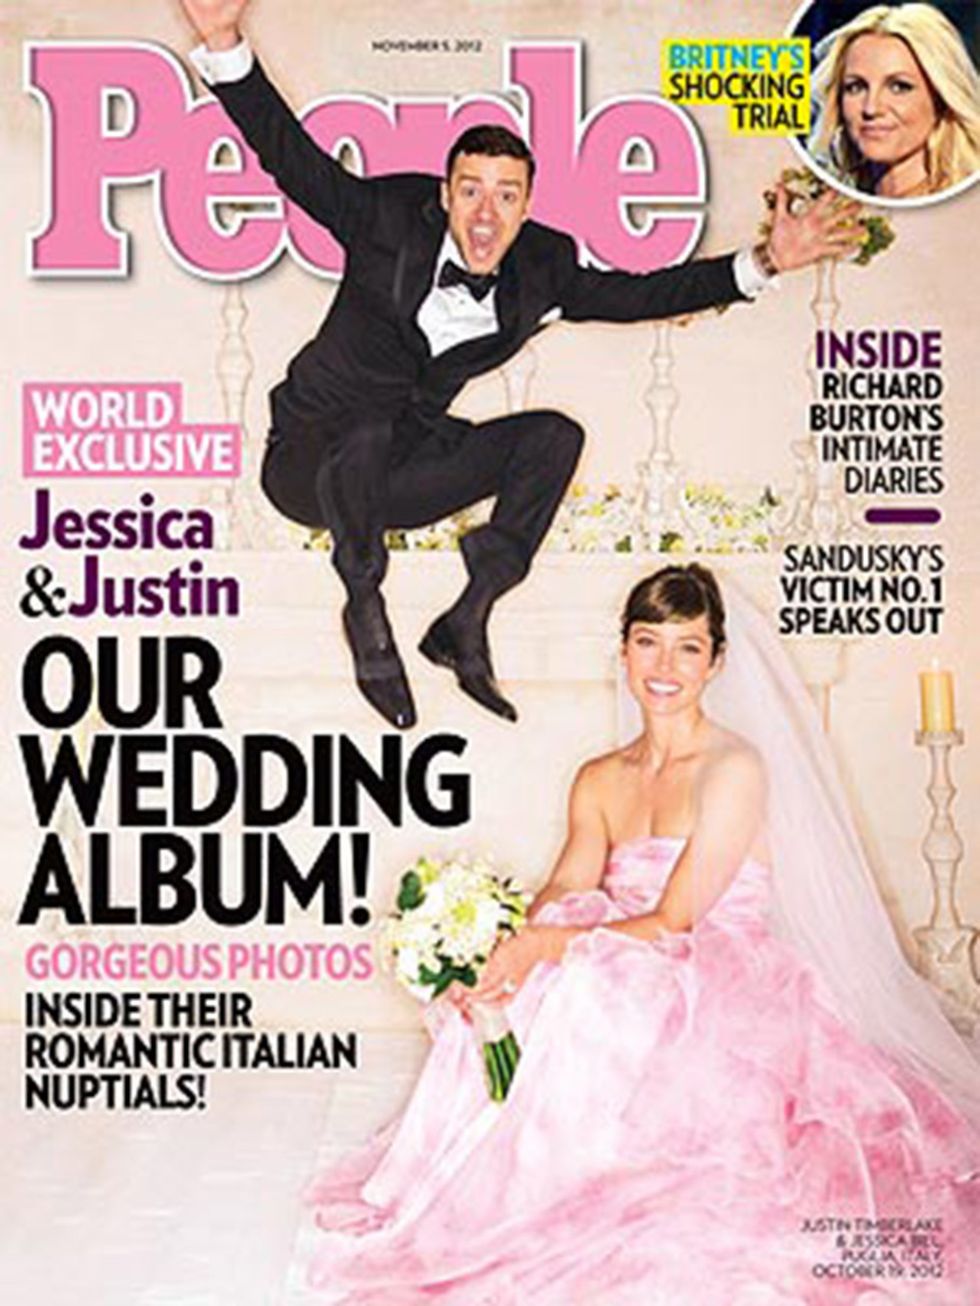 It was pink for Jessica Biel and black tie for Justin Timberlake in October 2012.